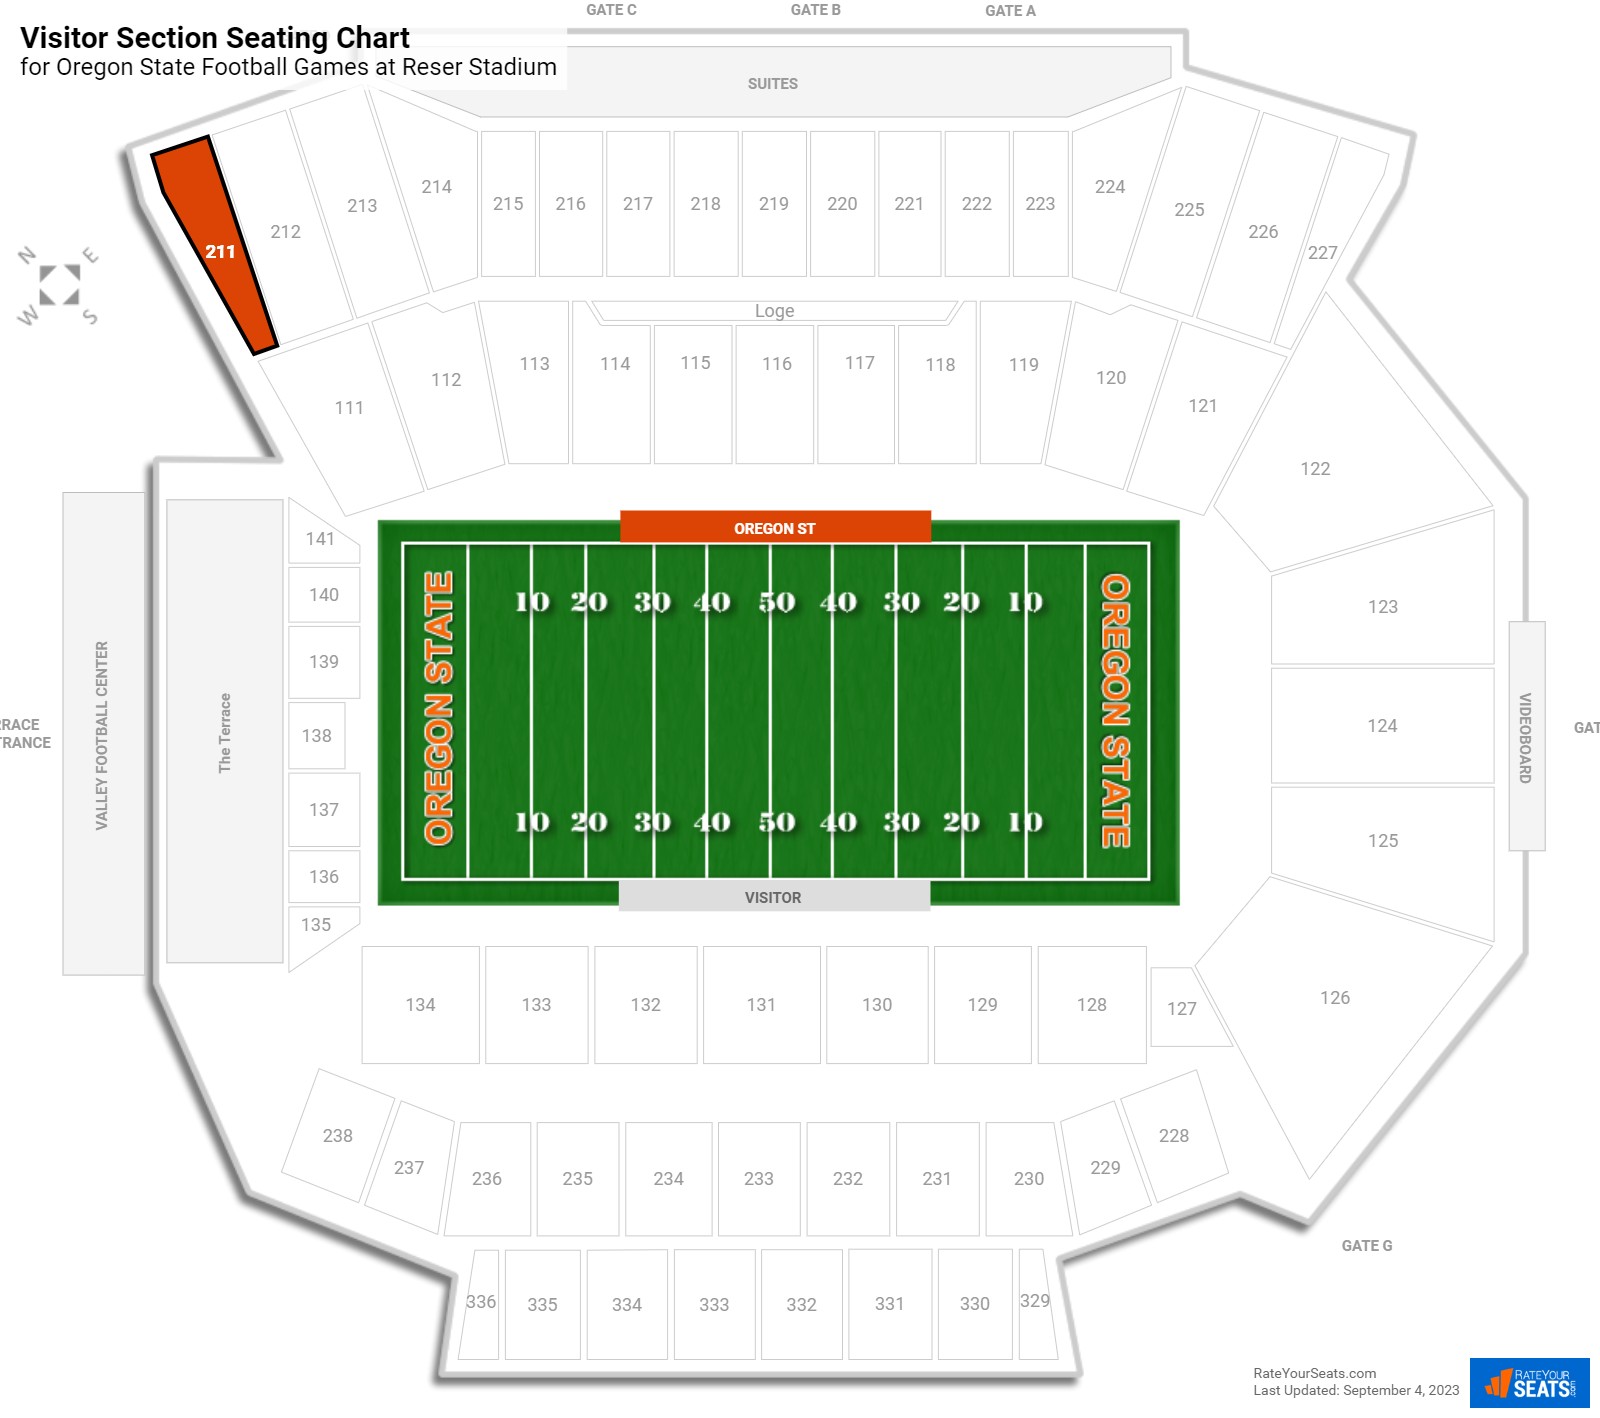 Oregon State Visitor Section Seating Chart at Reser Stadium